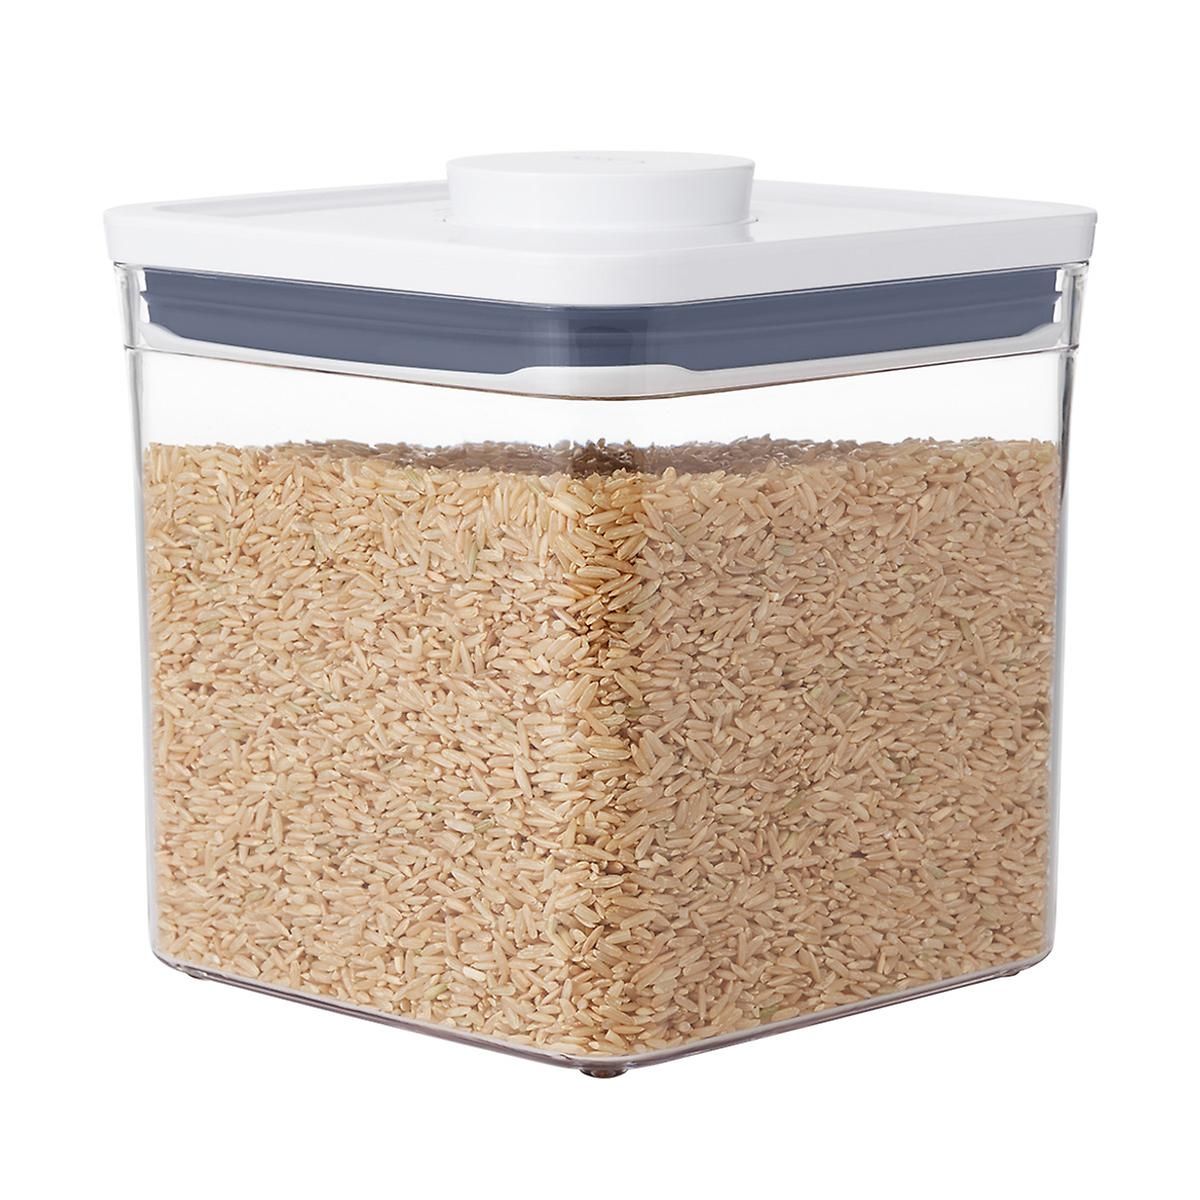 OXO 2.8 qt. Short Big Square POP Container | The Container Store